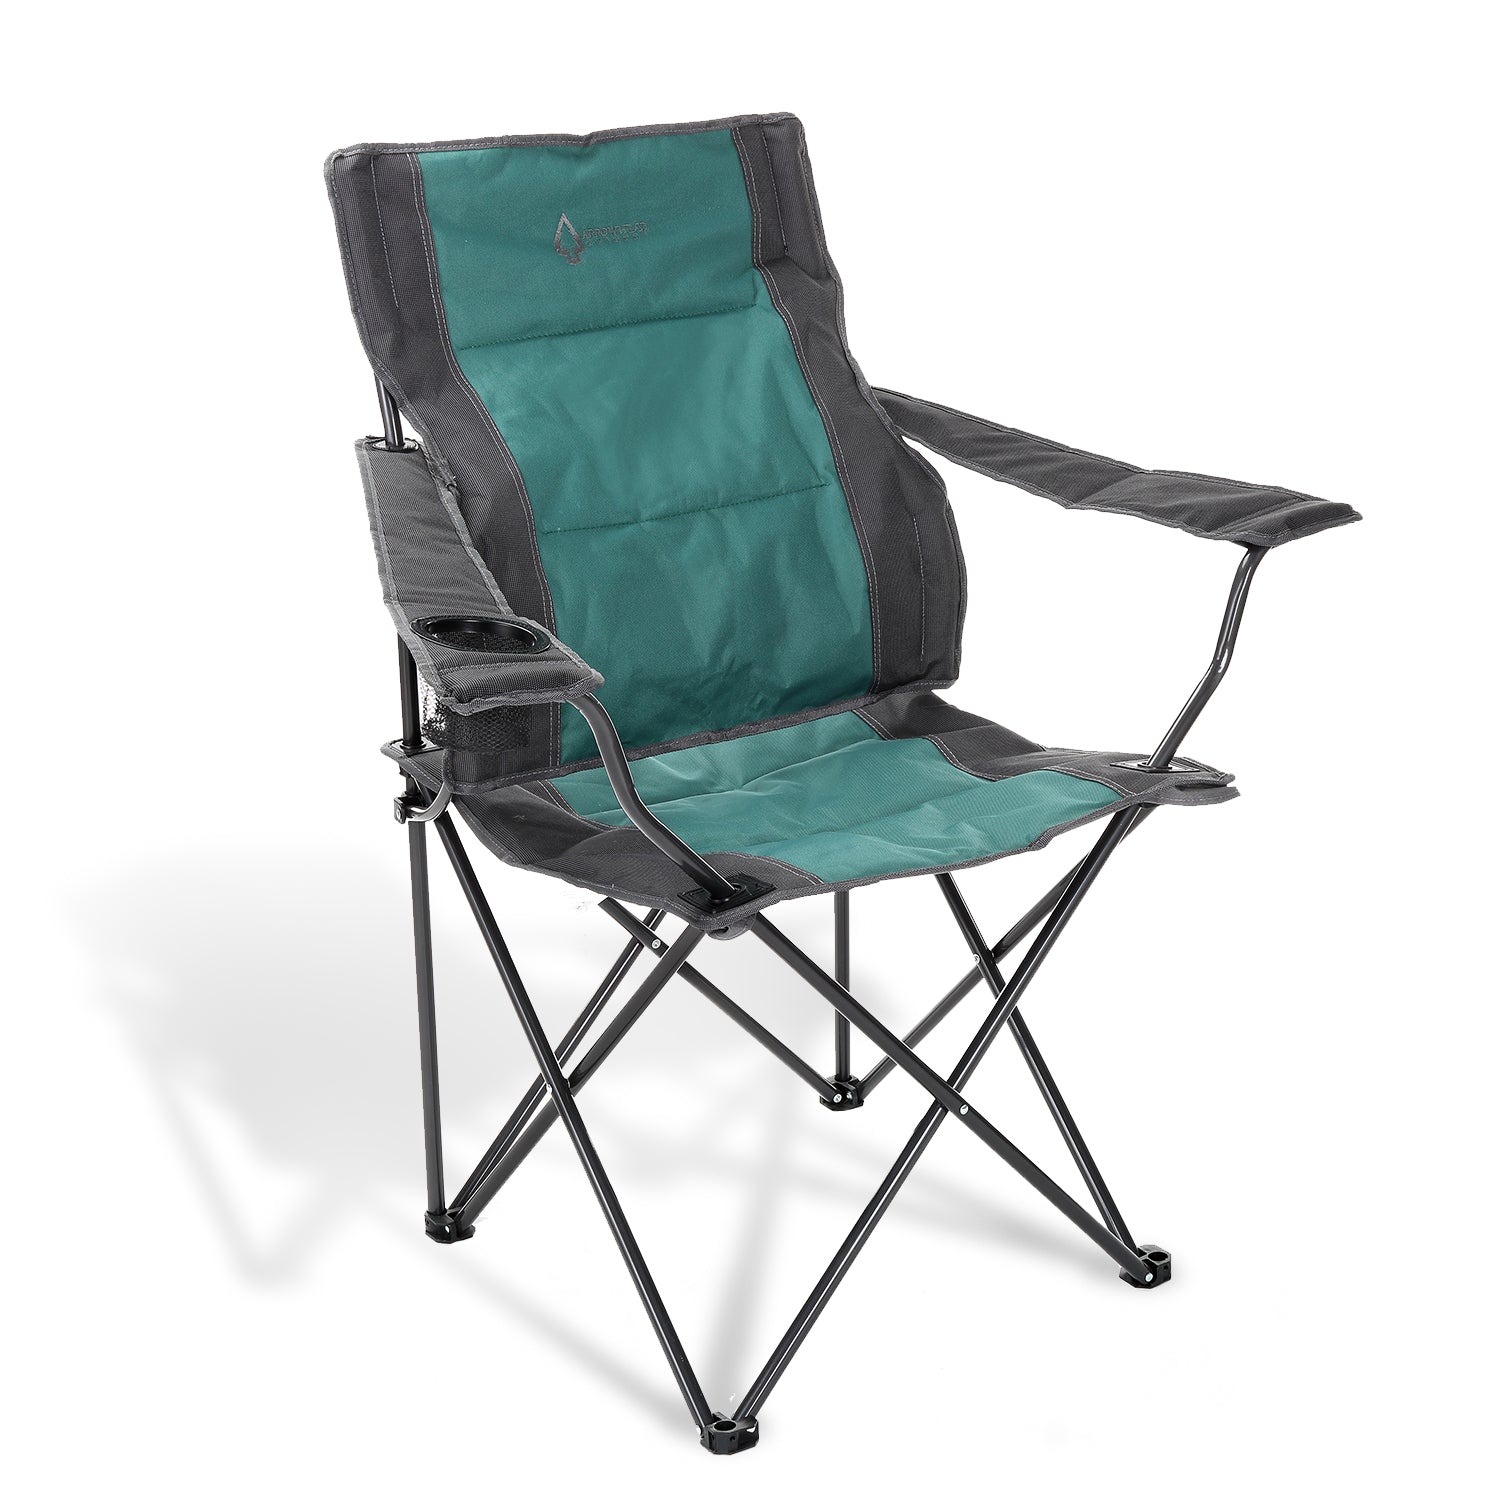 ARROWHEAD OUTDOOR Portable Folding Camping Quad Bucket Chair, Compact,  Heavy-Duty, Steel Frame, Supports up to 250lbs, Includes Carrying Bag